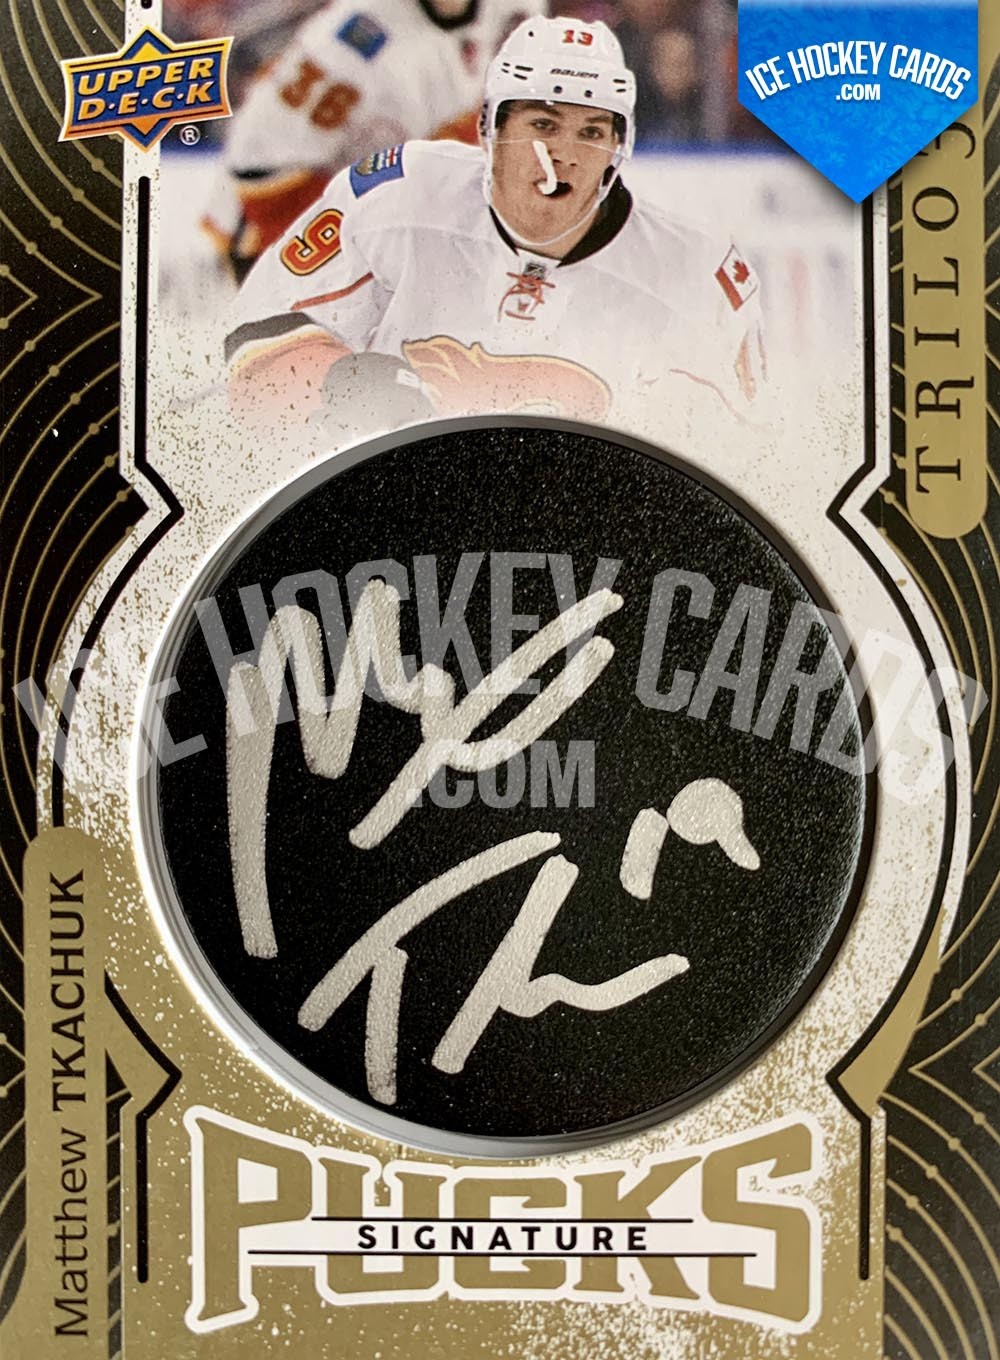 2017-18 SP Authentic Sign of the Times Autographs Matthew Tkachuk